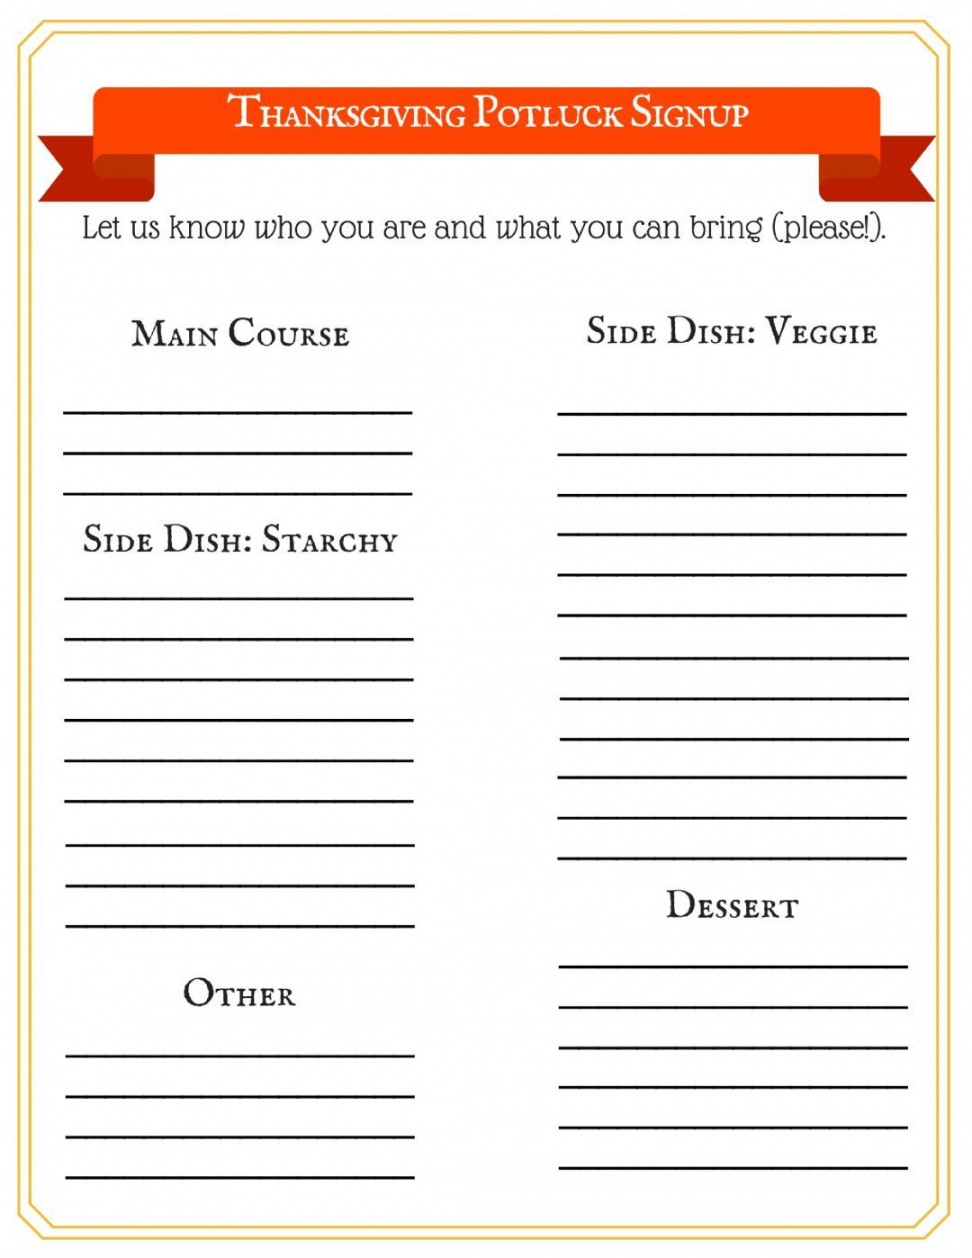 This Free Thanksgiving Potluck Signup Sheet Makes Your Big Day  - FREE Printables - Free Printable Thanksgiving Potluck Sign Up Sheet